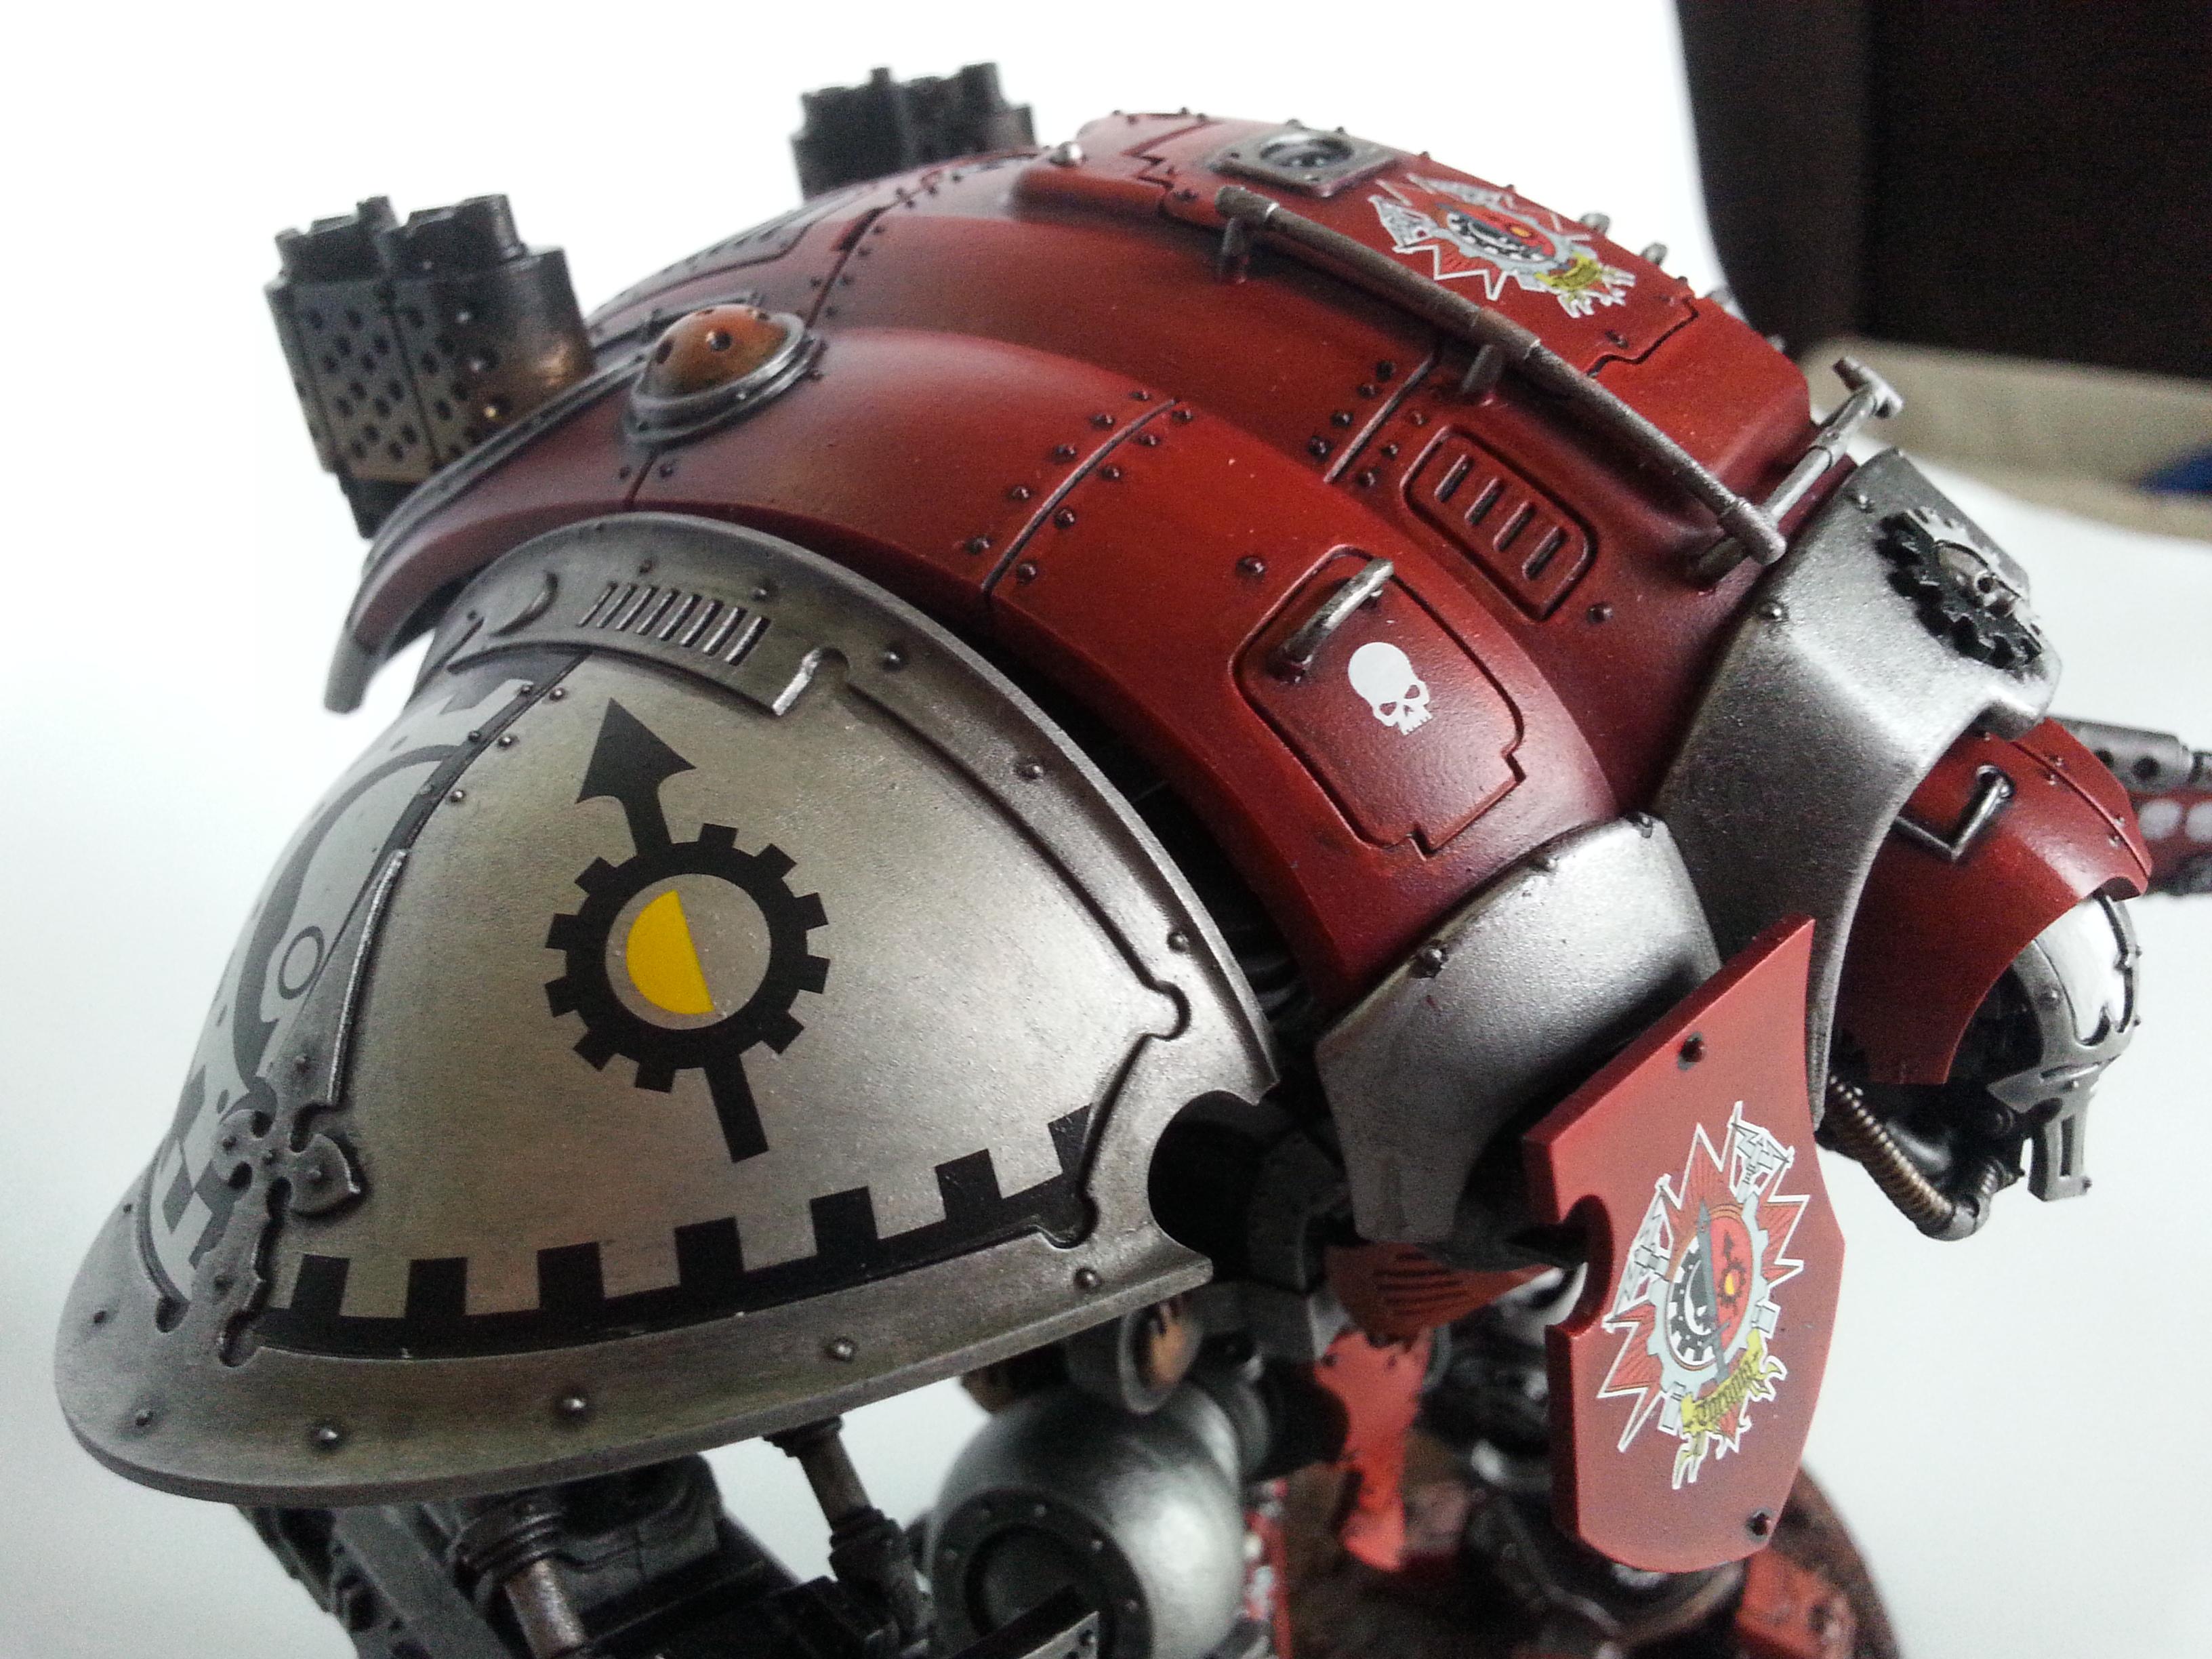 Imperial Knight, Imperial Knights